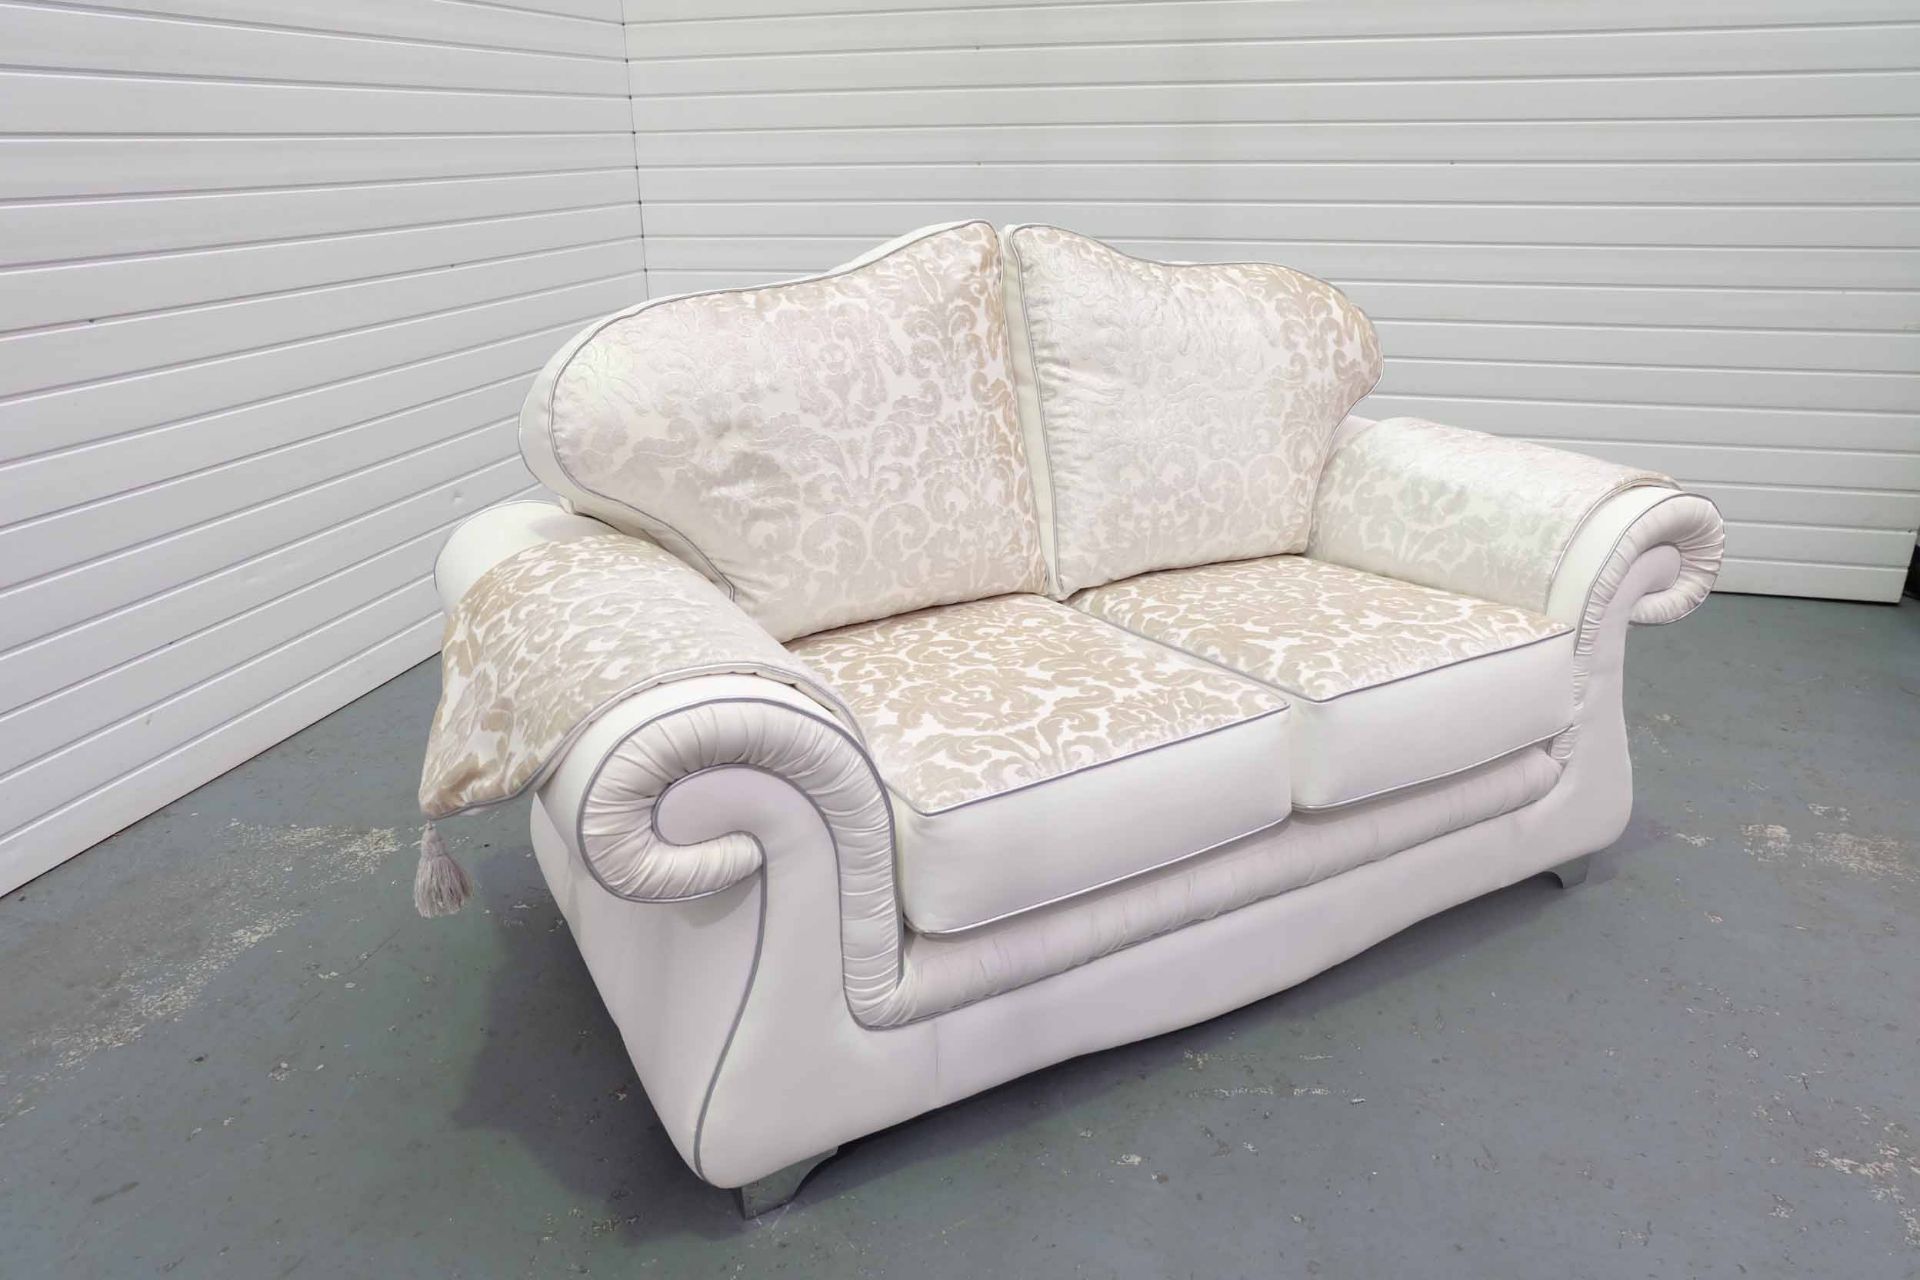 Handmade Collection 2 Seater Sofa. With Arm Throws. - Image 3 of 8